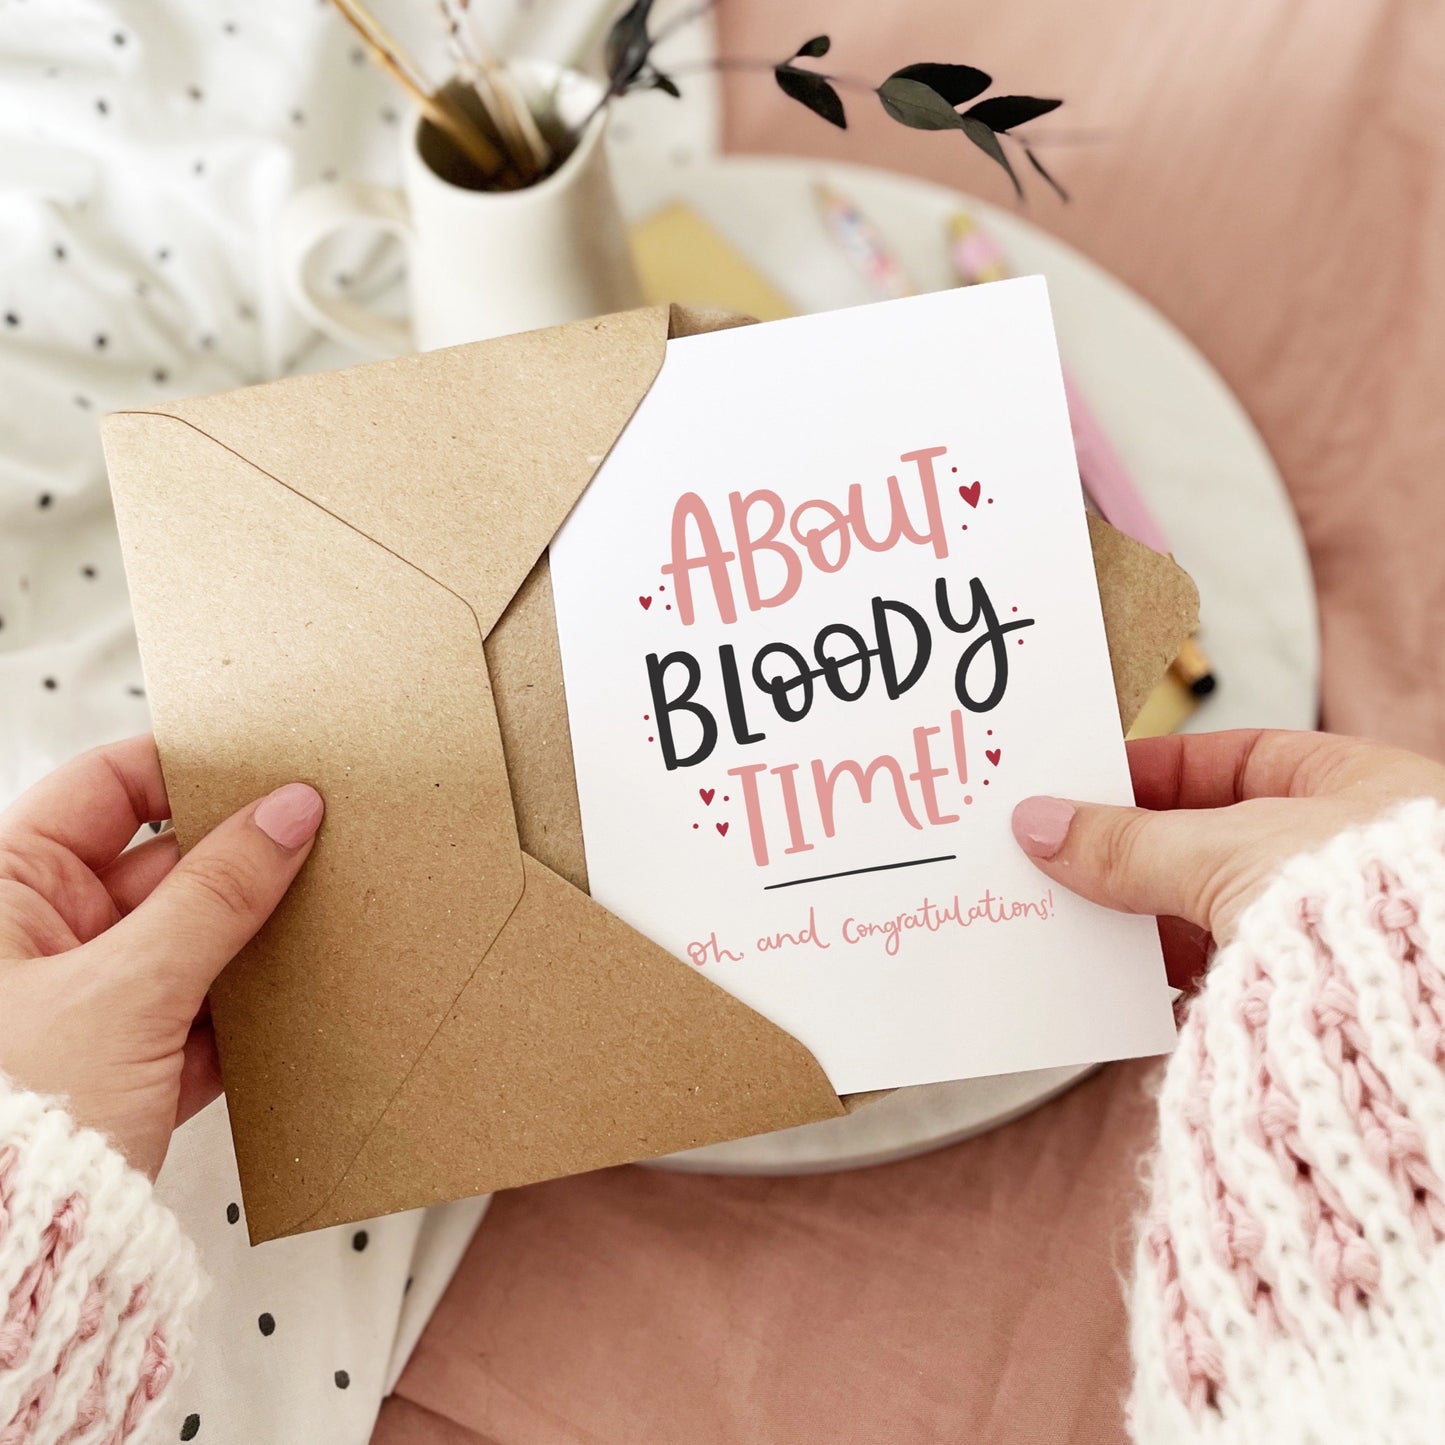 About bloody time congratulations greeting card by Abbie Imagine